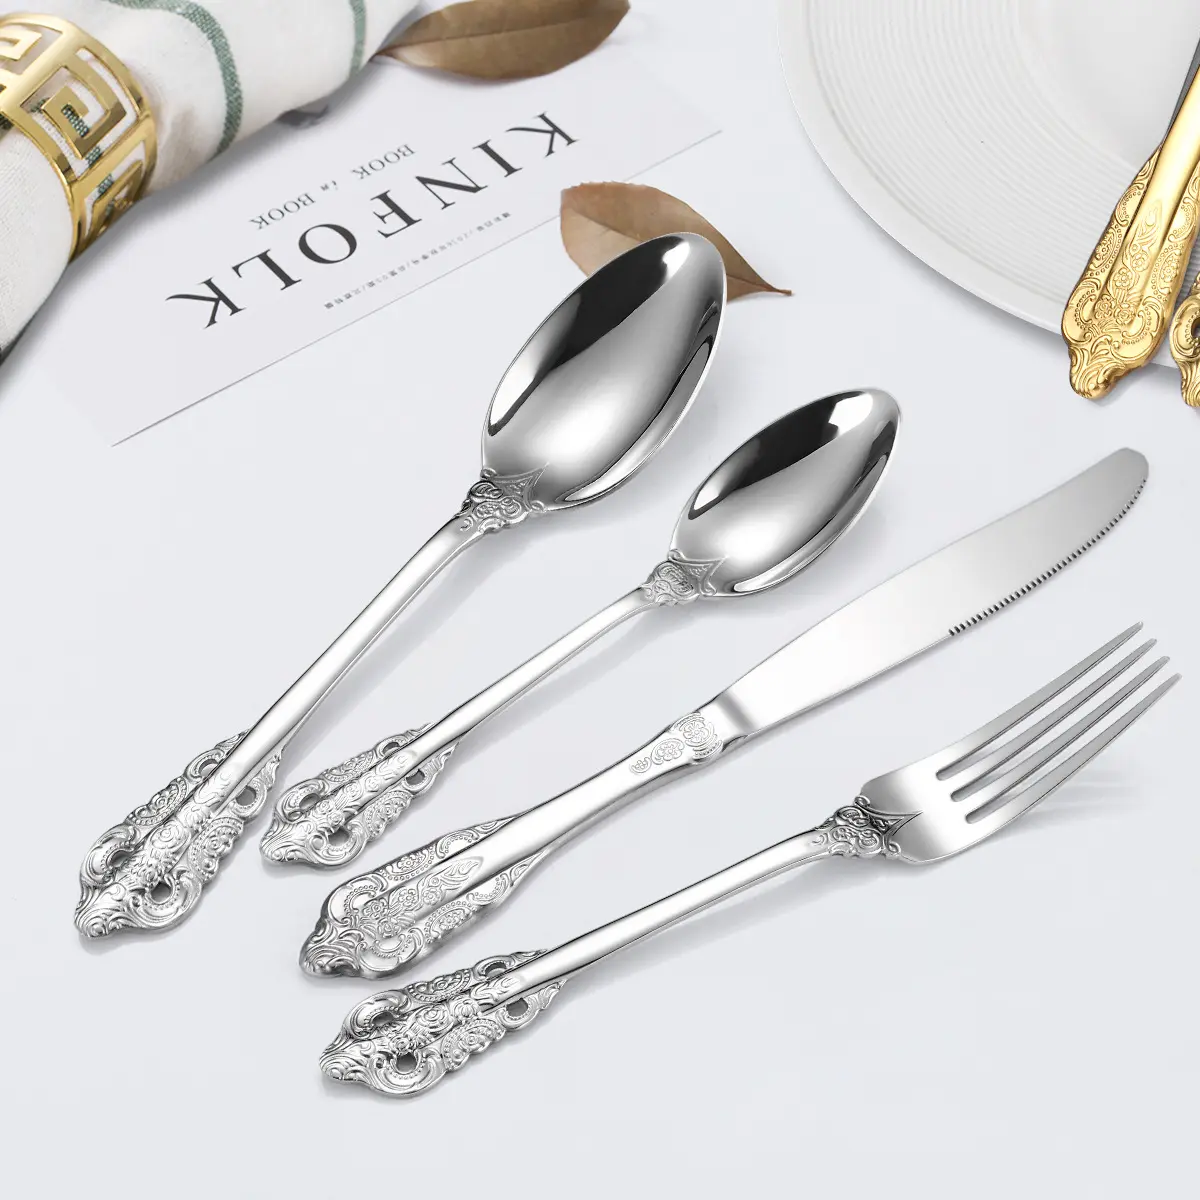 Hotel Luxury Spoon Fork Gold Silver color cutlery Cooking Spoon Cutlery Wedding stainless steel Tableware Gold Spoon Set